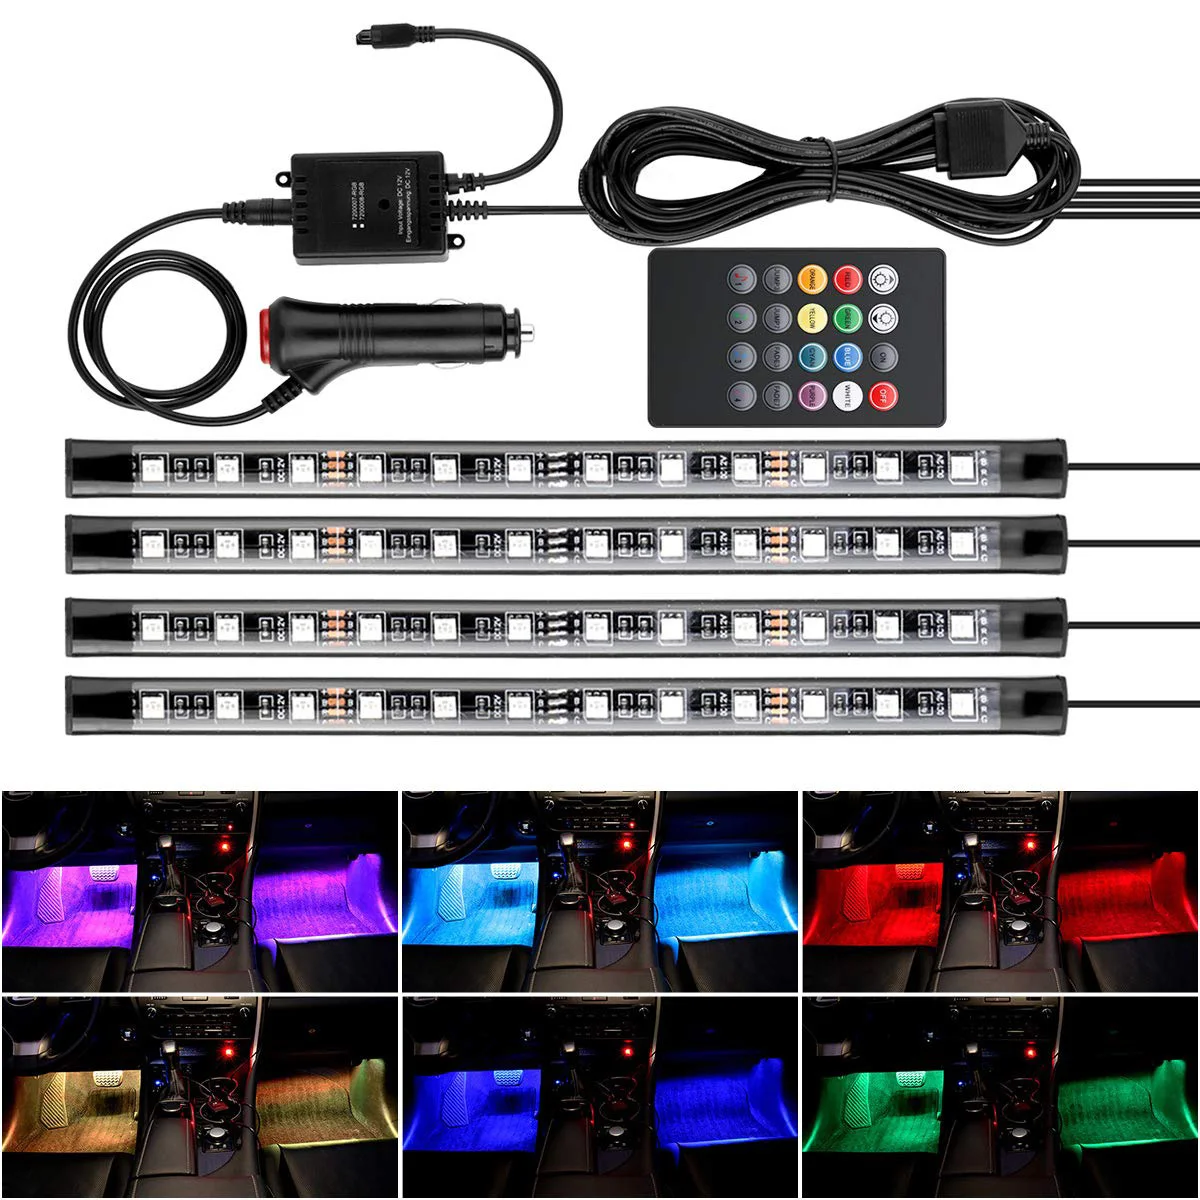 Music Activated RGB Automobile Interior Decoration Light Bars LE 4pcs 48 LEDs Car Strip Lights Car Charger Included DC 12V Sound Sensor Function Wireless Remote Control 